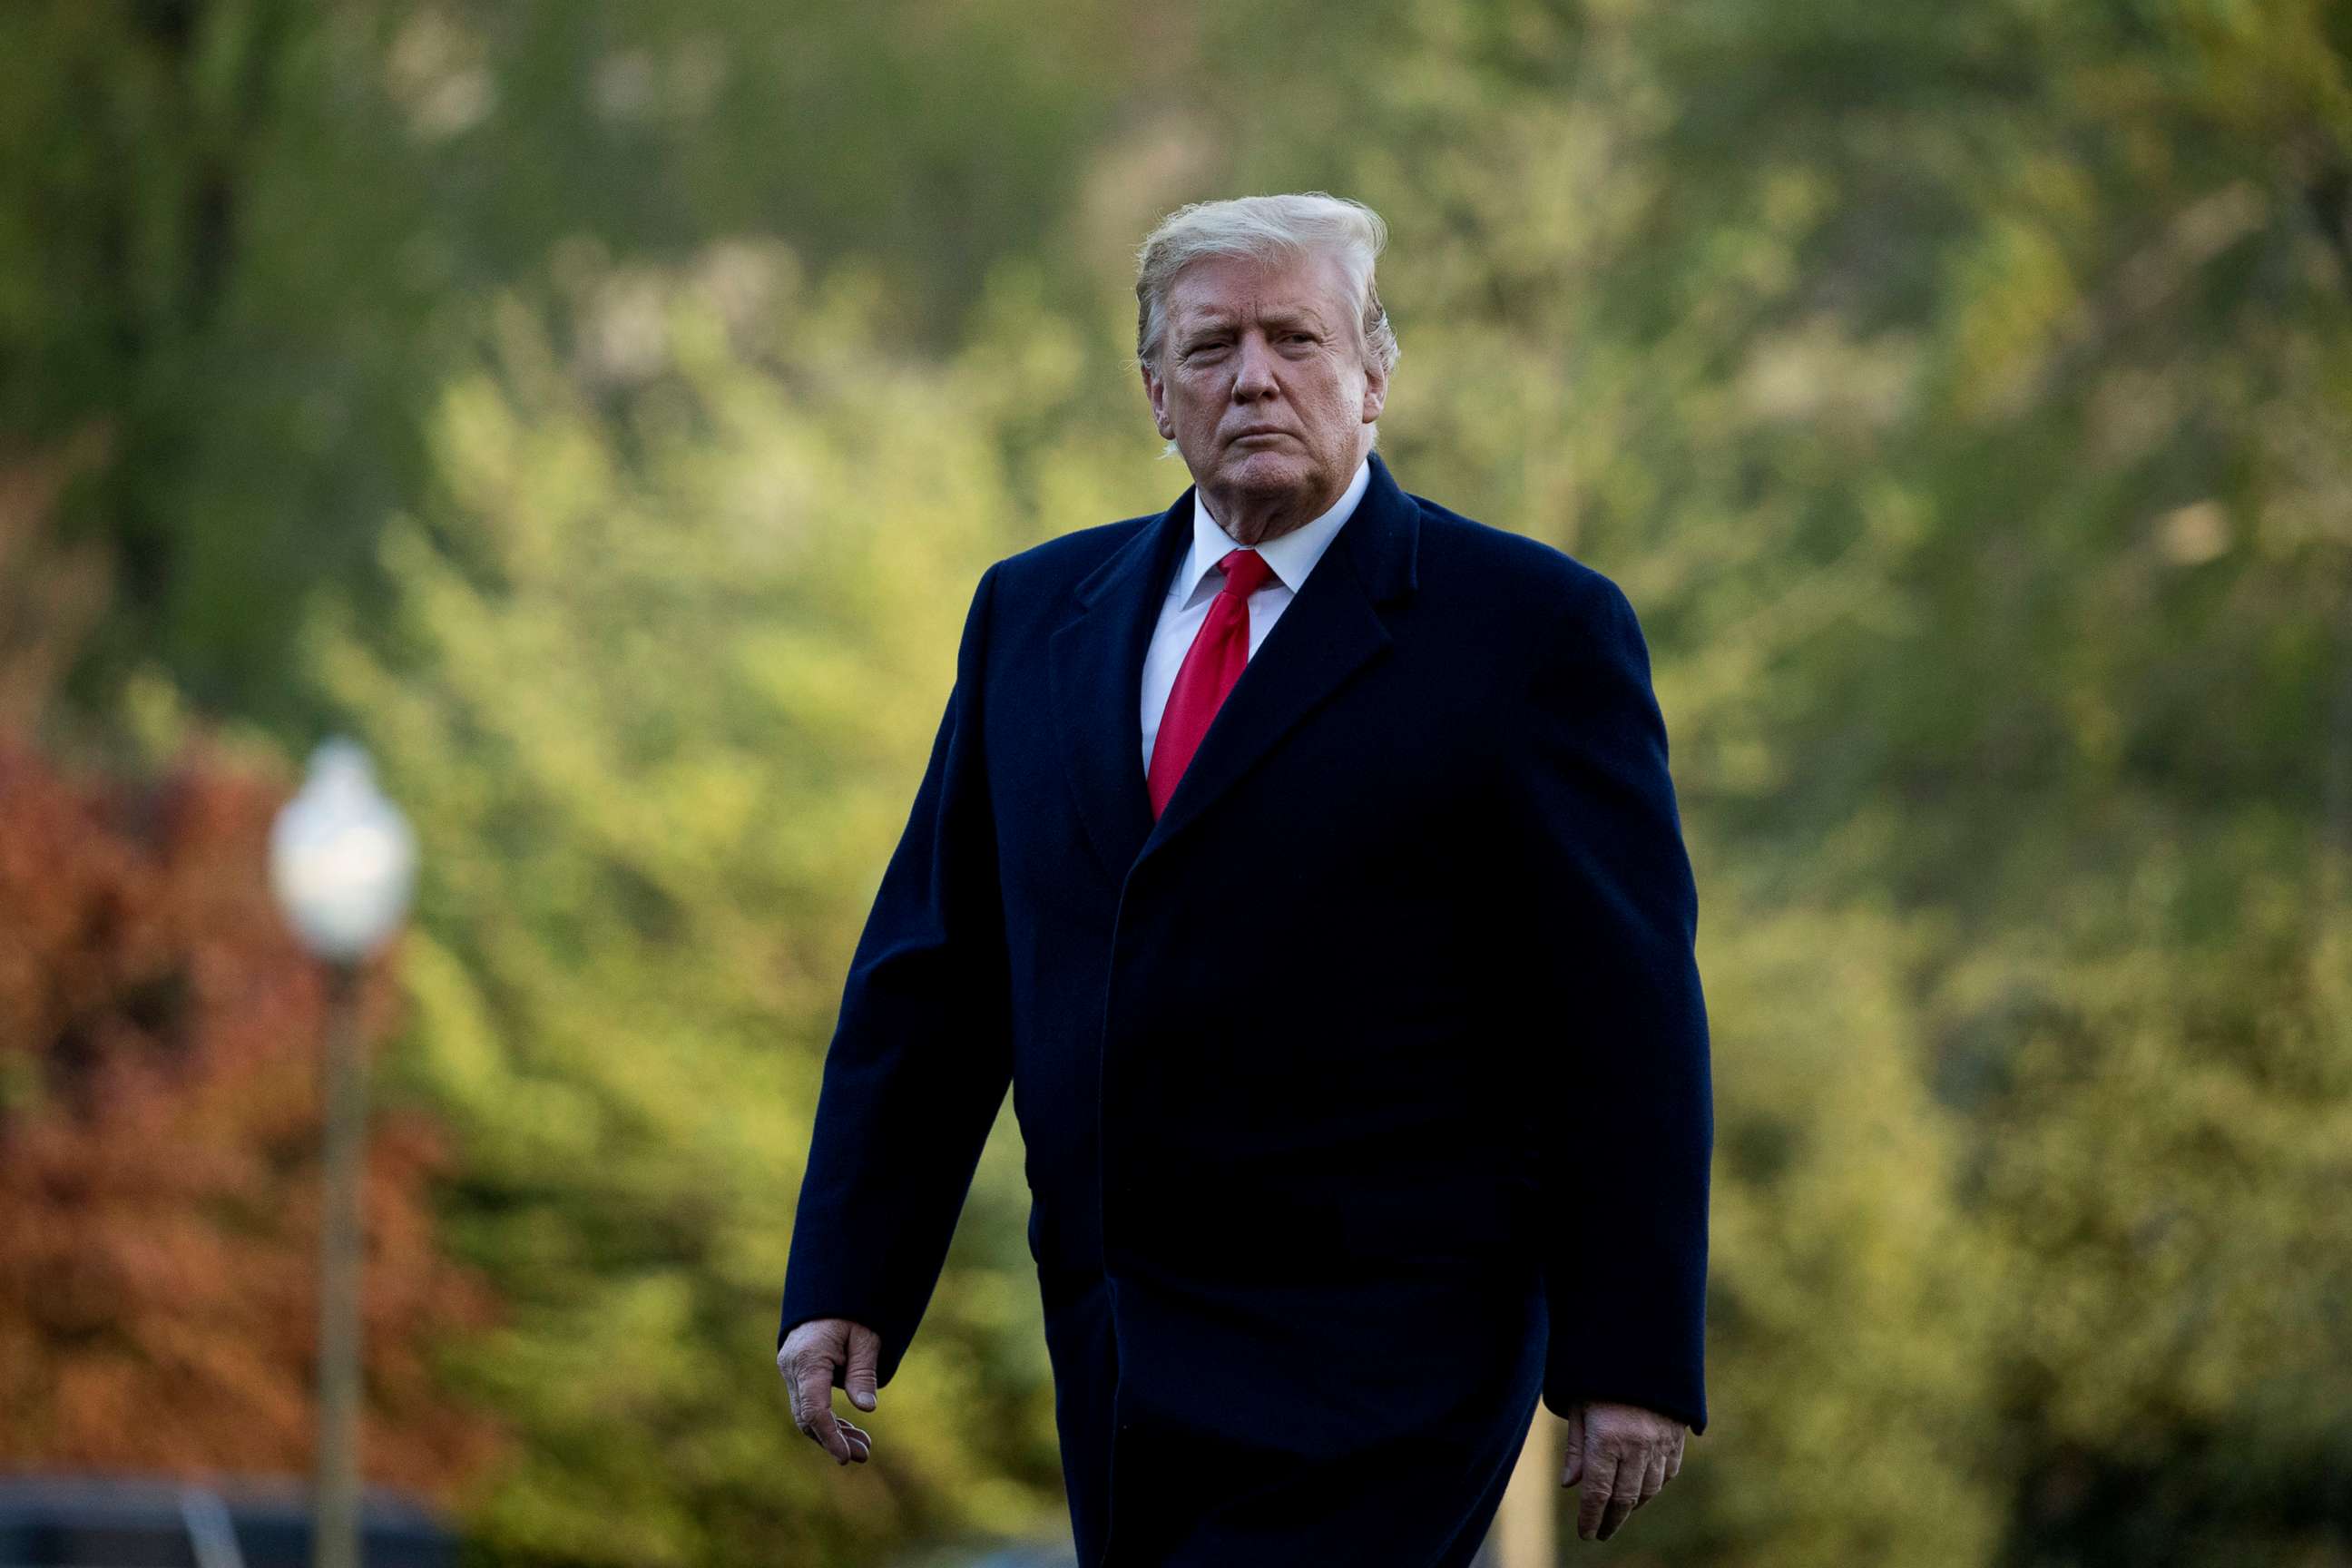 PHOTO:President Donald Trump walks on the South Lawn as he arrives at the White House in Washington, April 15, 2019.